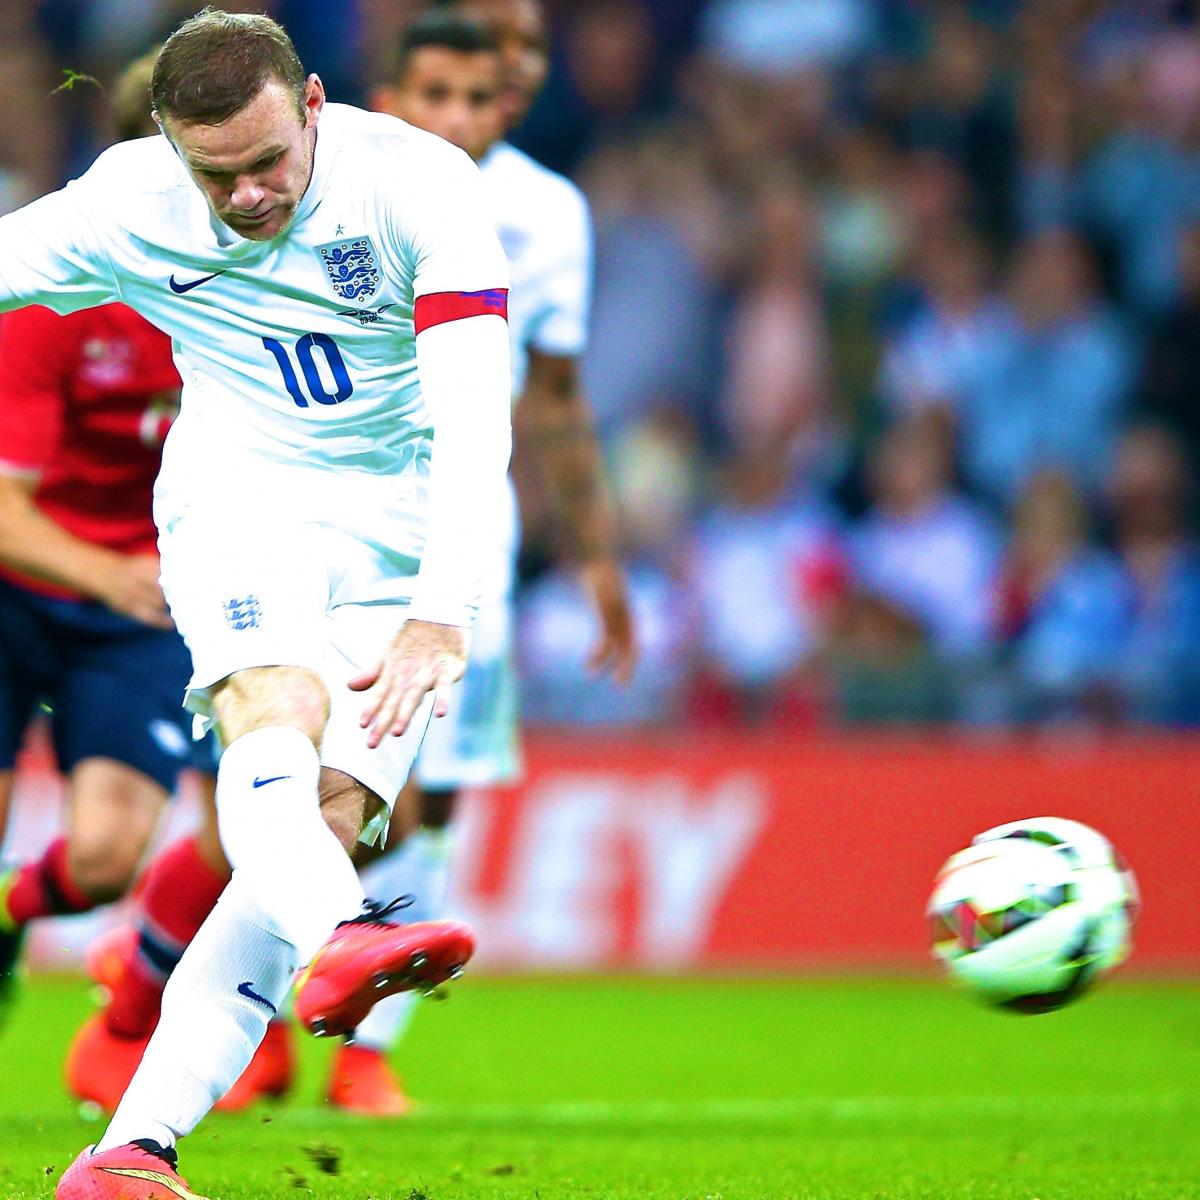 England vs. San Marino: Live Score, Highlights from Euro 2016 Qualifier